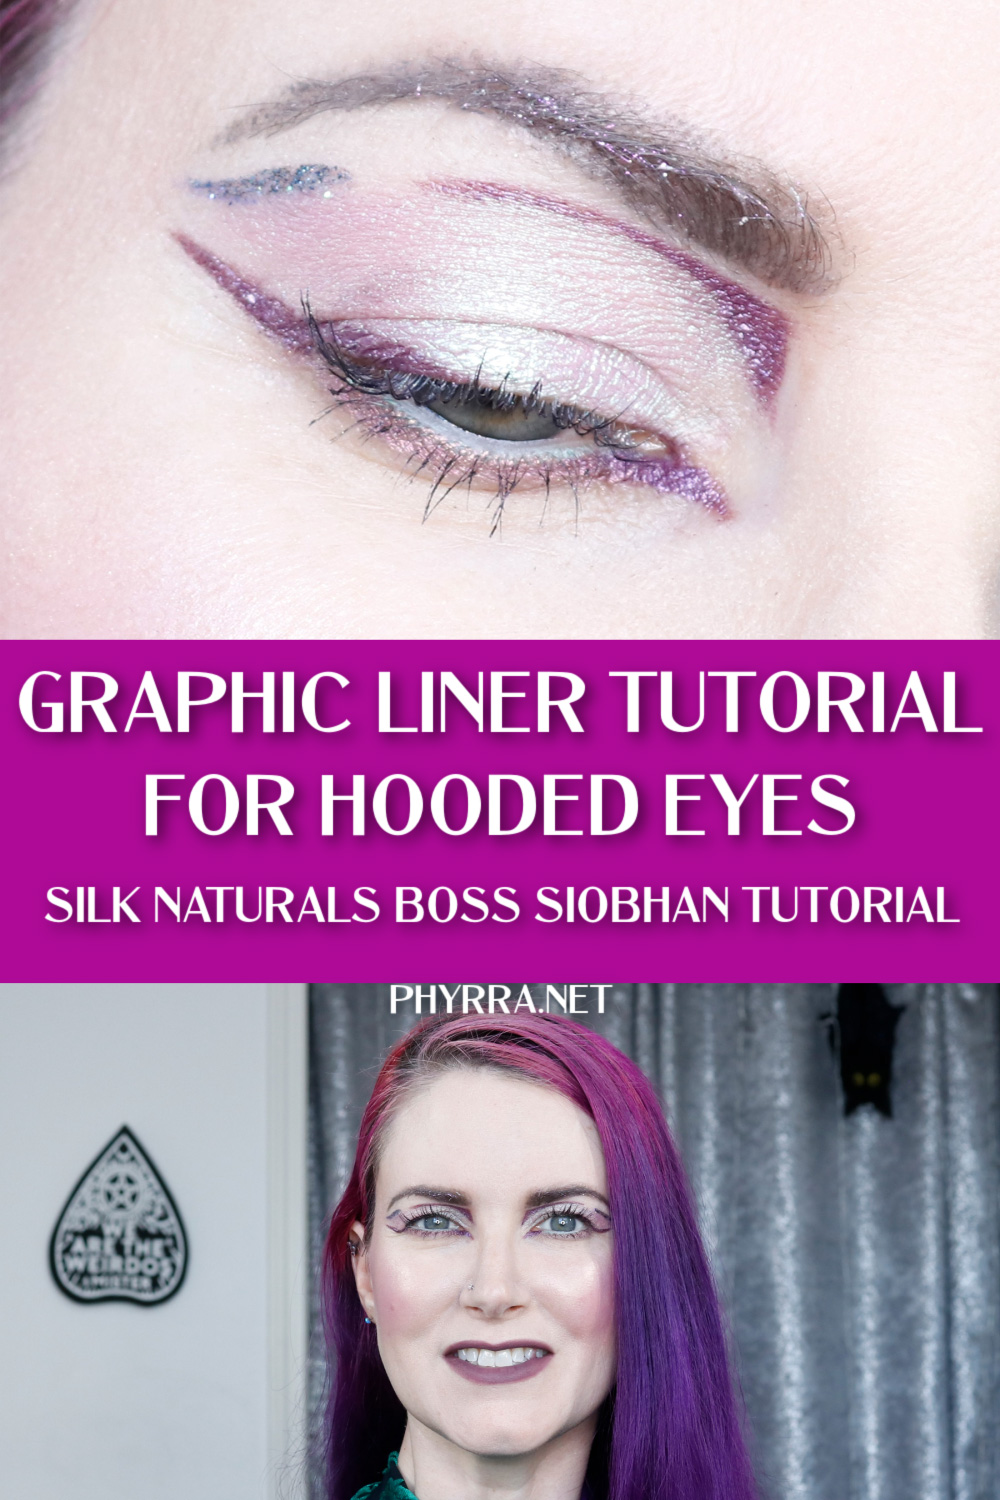 Silk Naturals Boss Siobhan Tutorial a graphic liner tutorial for hooded eyes